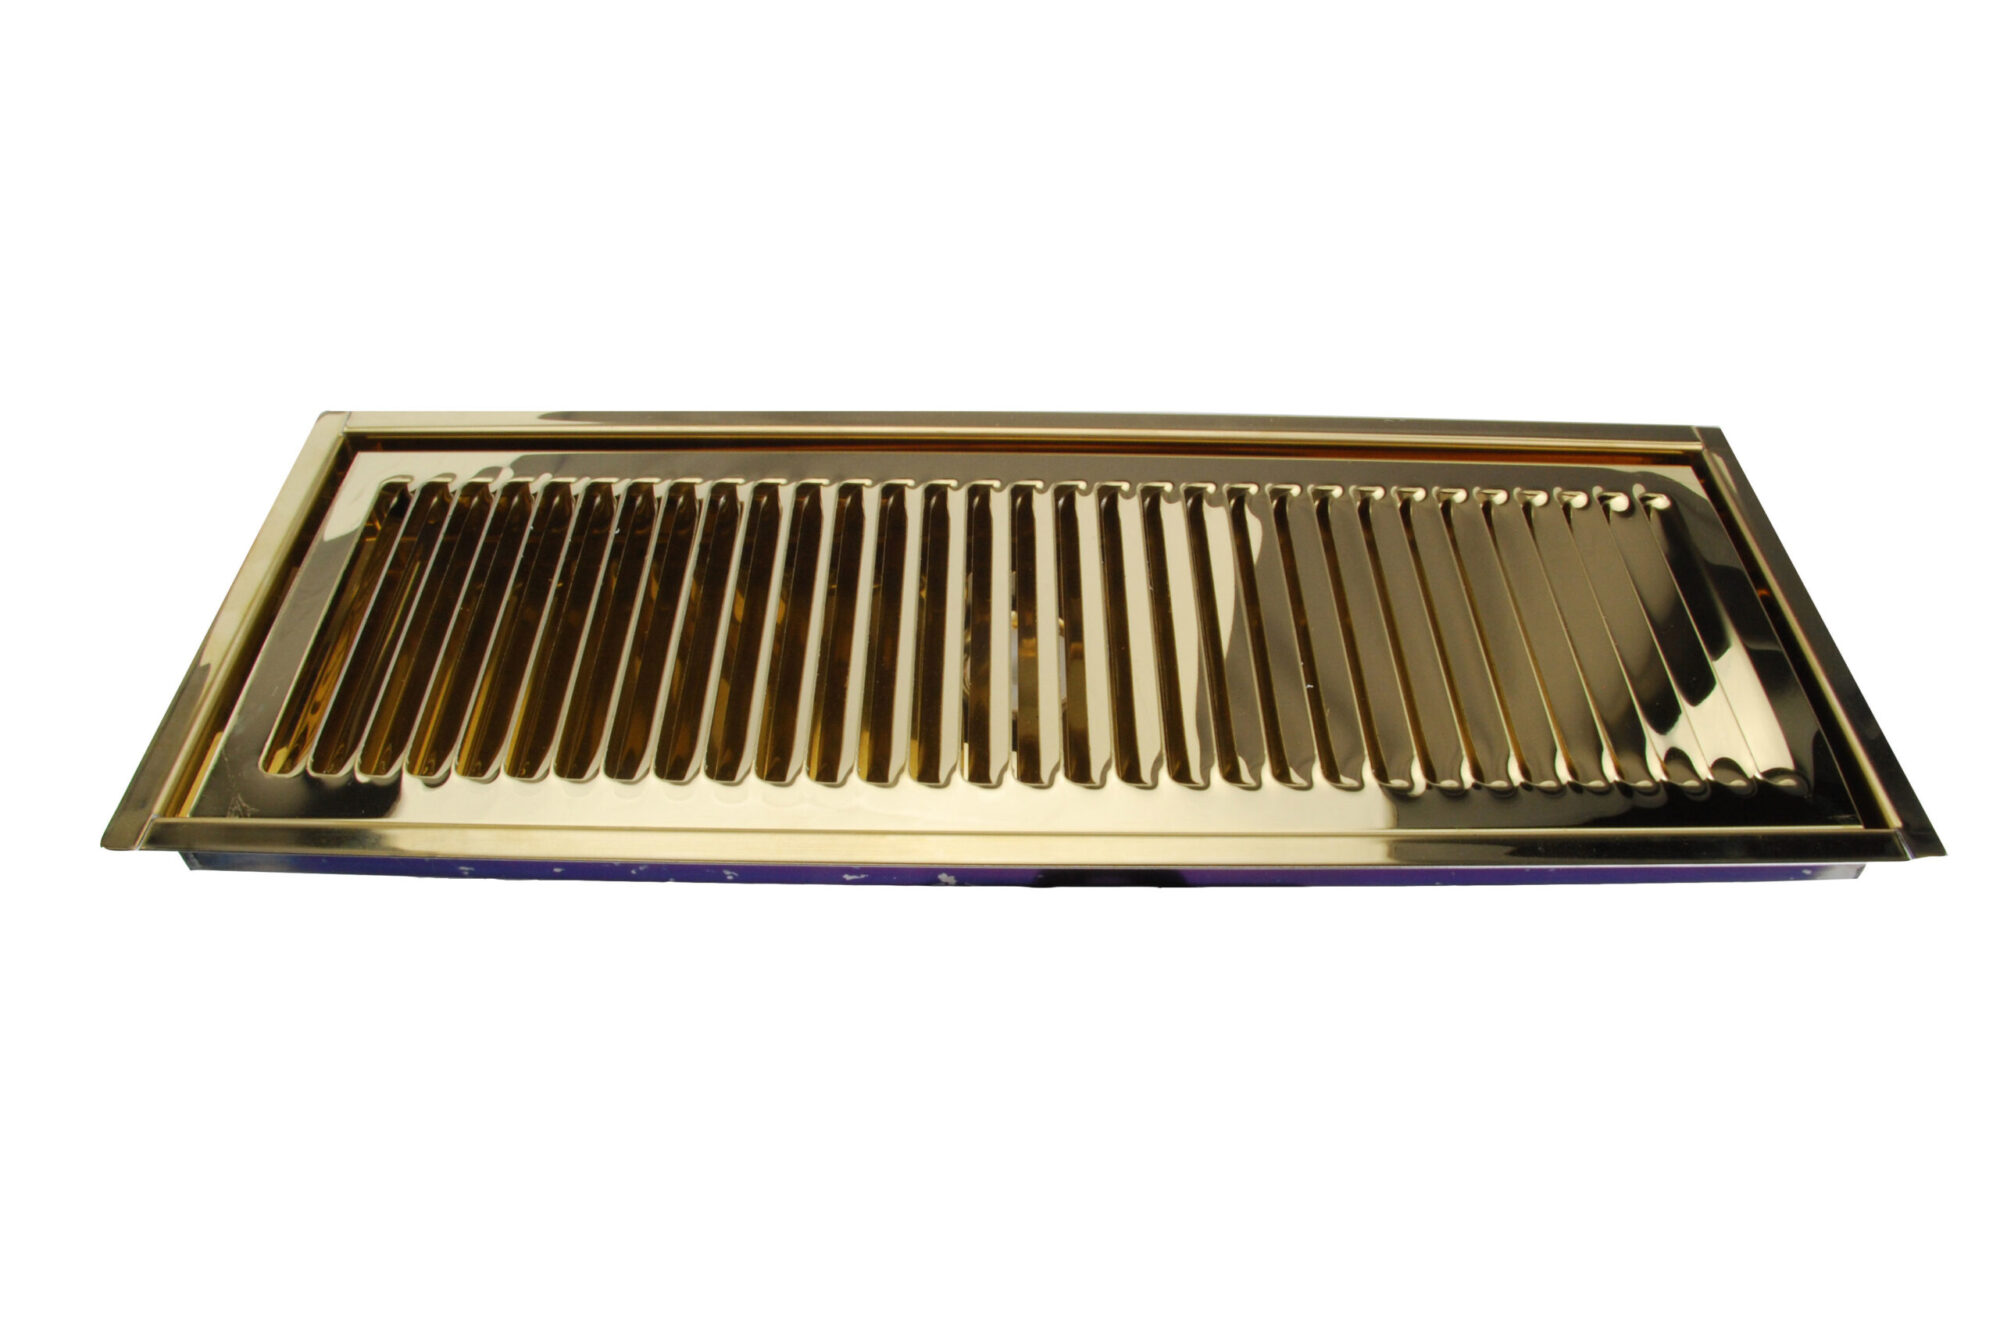 616FLBM-30 PVD Brass Flush Mount Tray with Drain and PVD Brass Grid - 30"L x 5 3/8"W x 3/4"D